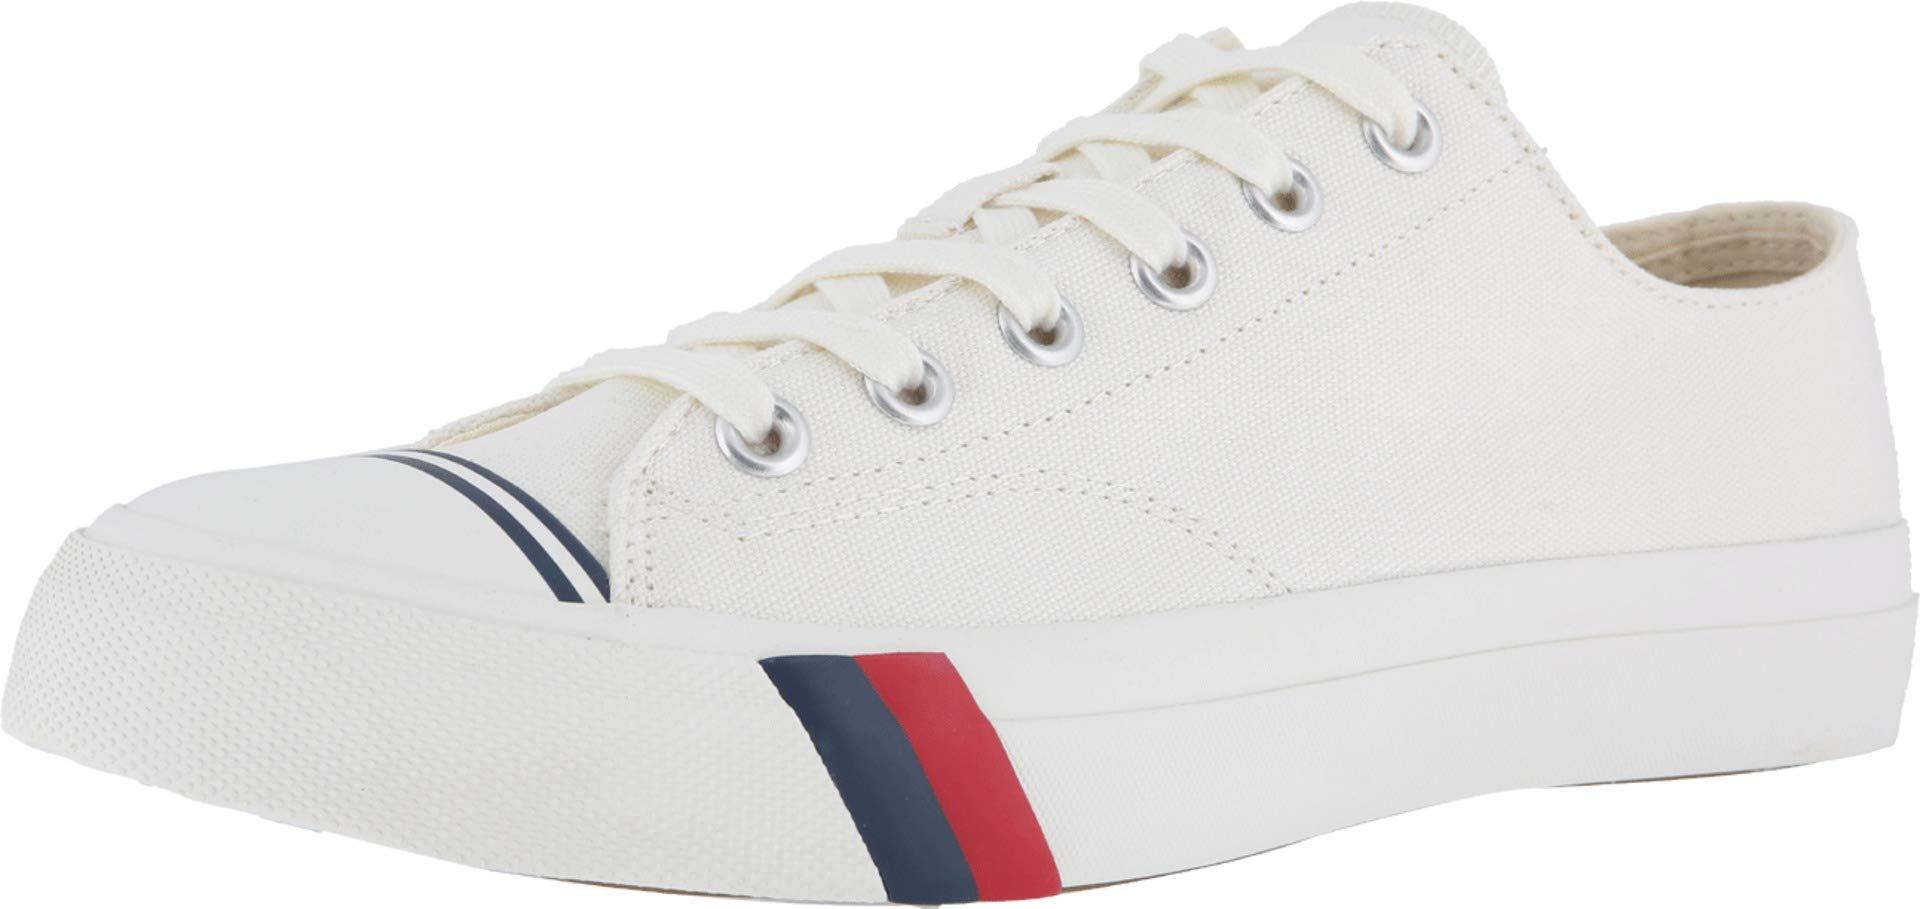 Pro Keds Royal Lo Classic Canvas in White for Men - Save 2% - Lyst